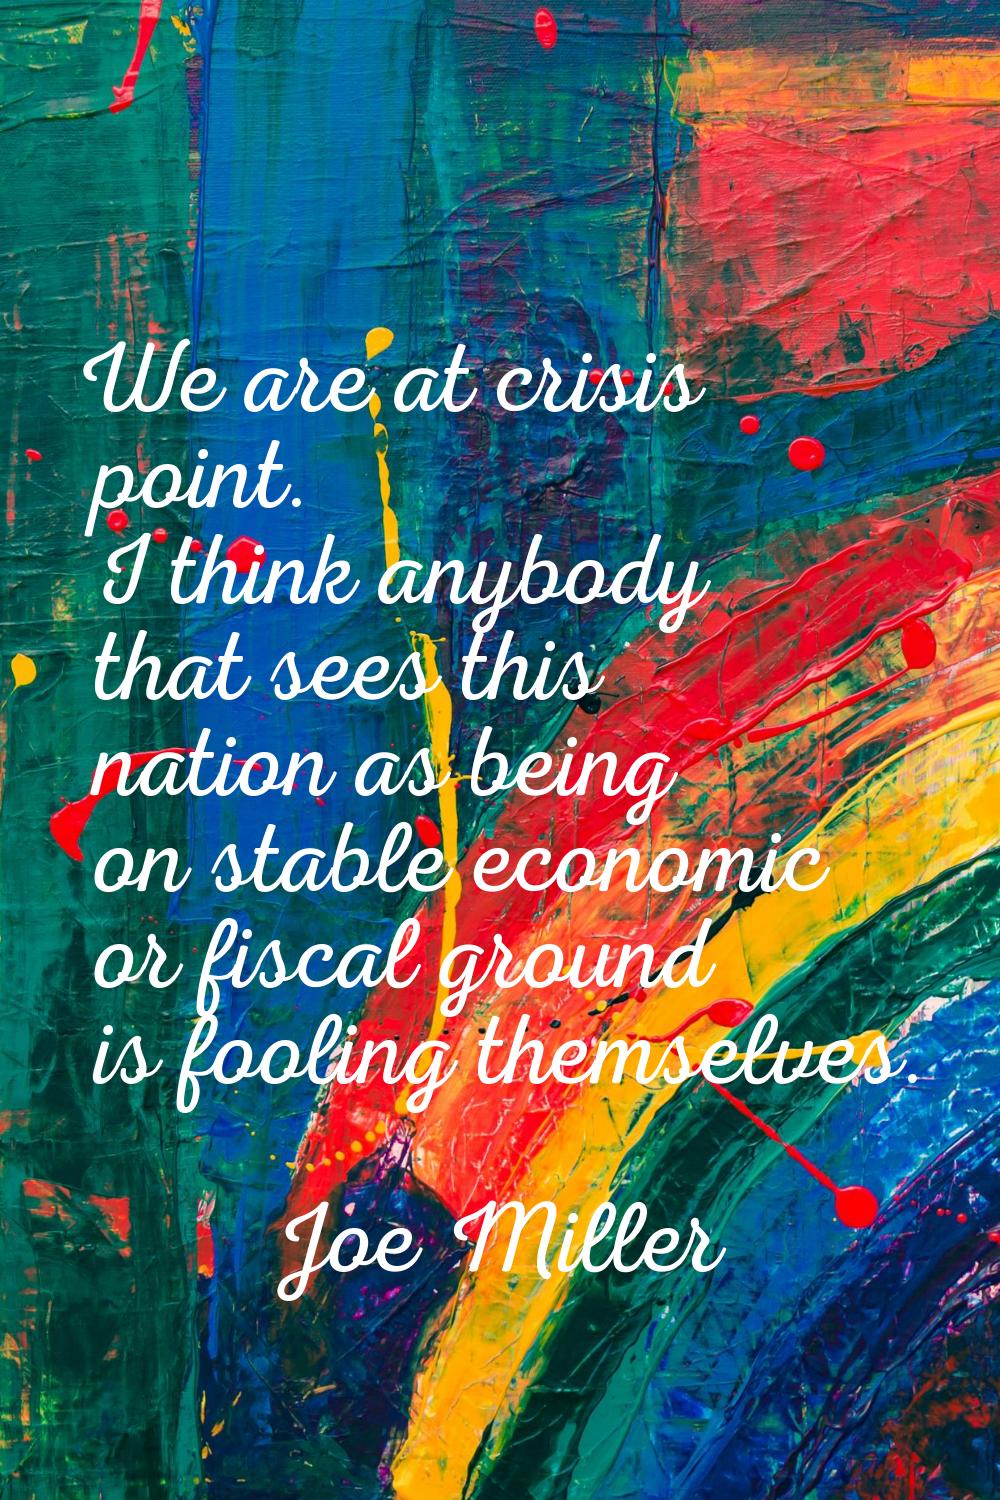 We are at crisis point. I think anybody that sees this nation as being on stable economic or fiscal